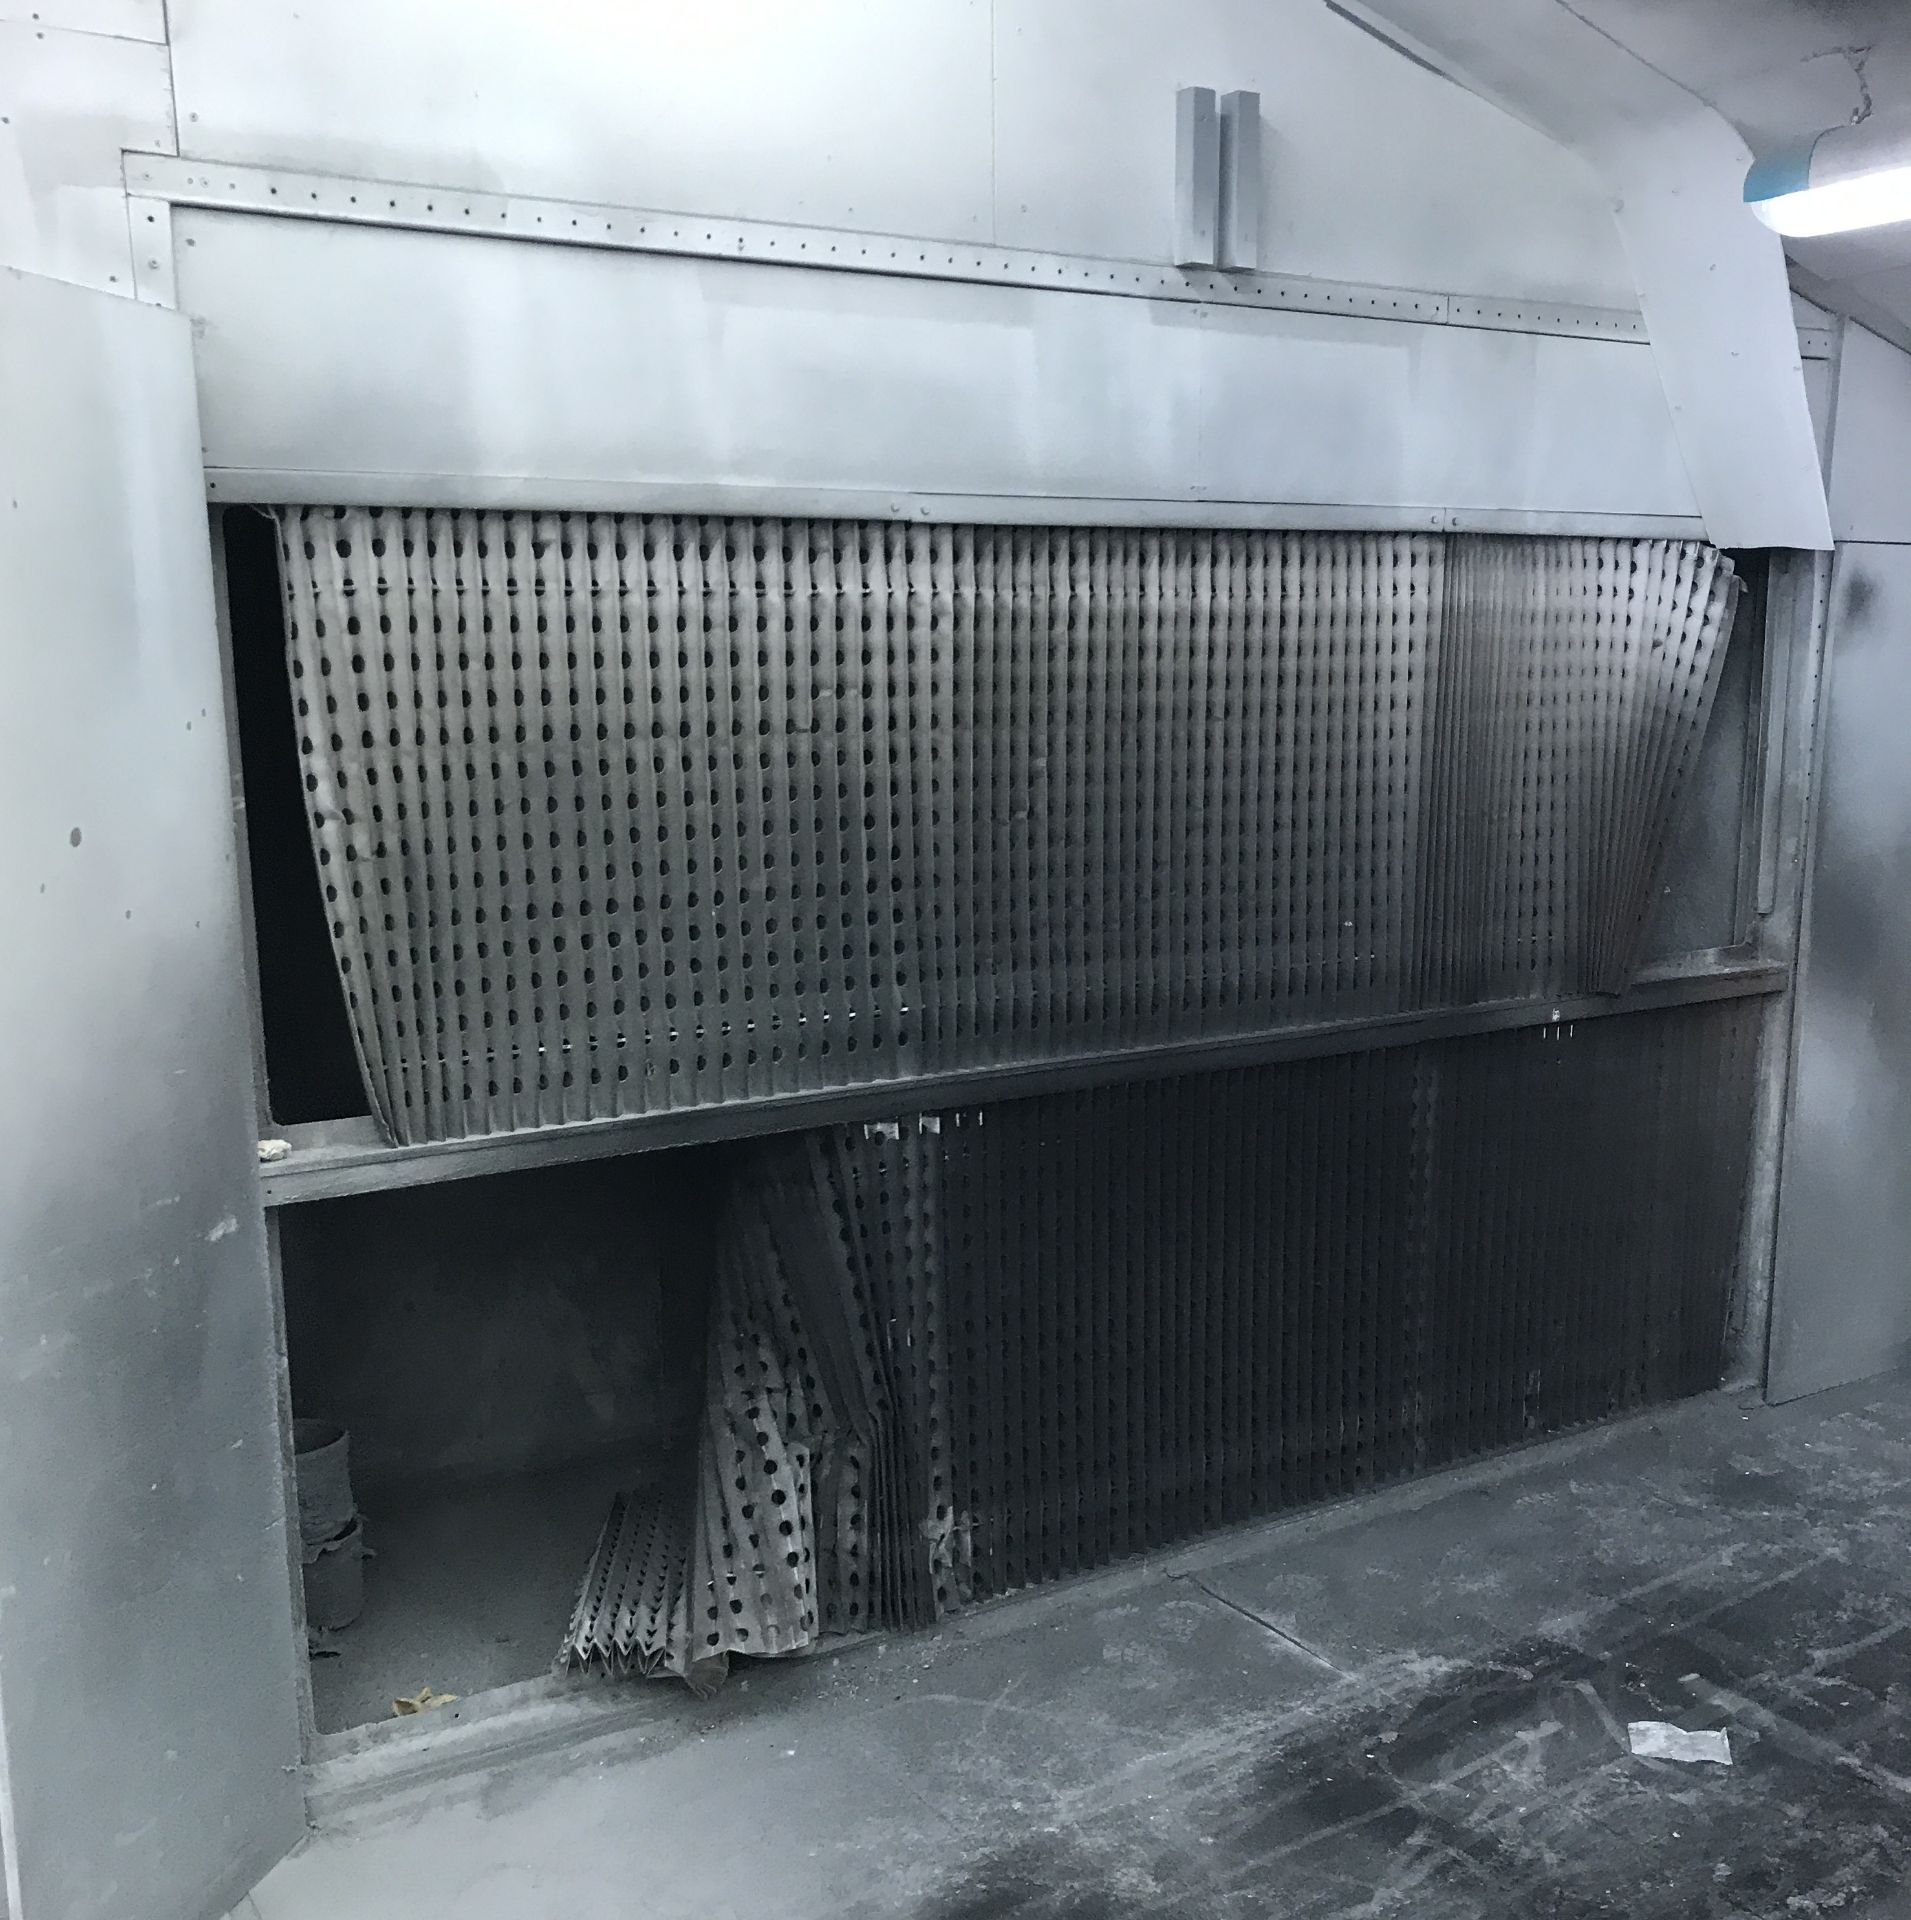 Twin Fercell Sectional Dryback Spray Booths (Purchaser to Dismantle - Must Provide RAMS, Copy of - Image 3 of 4